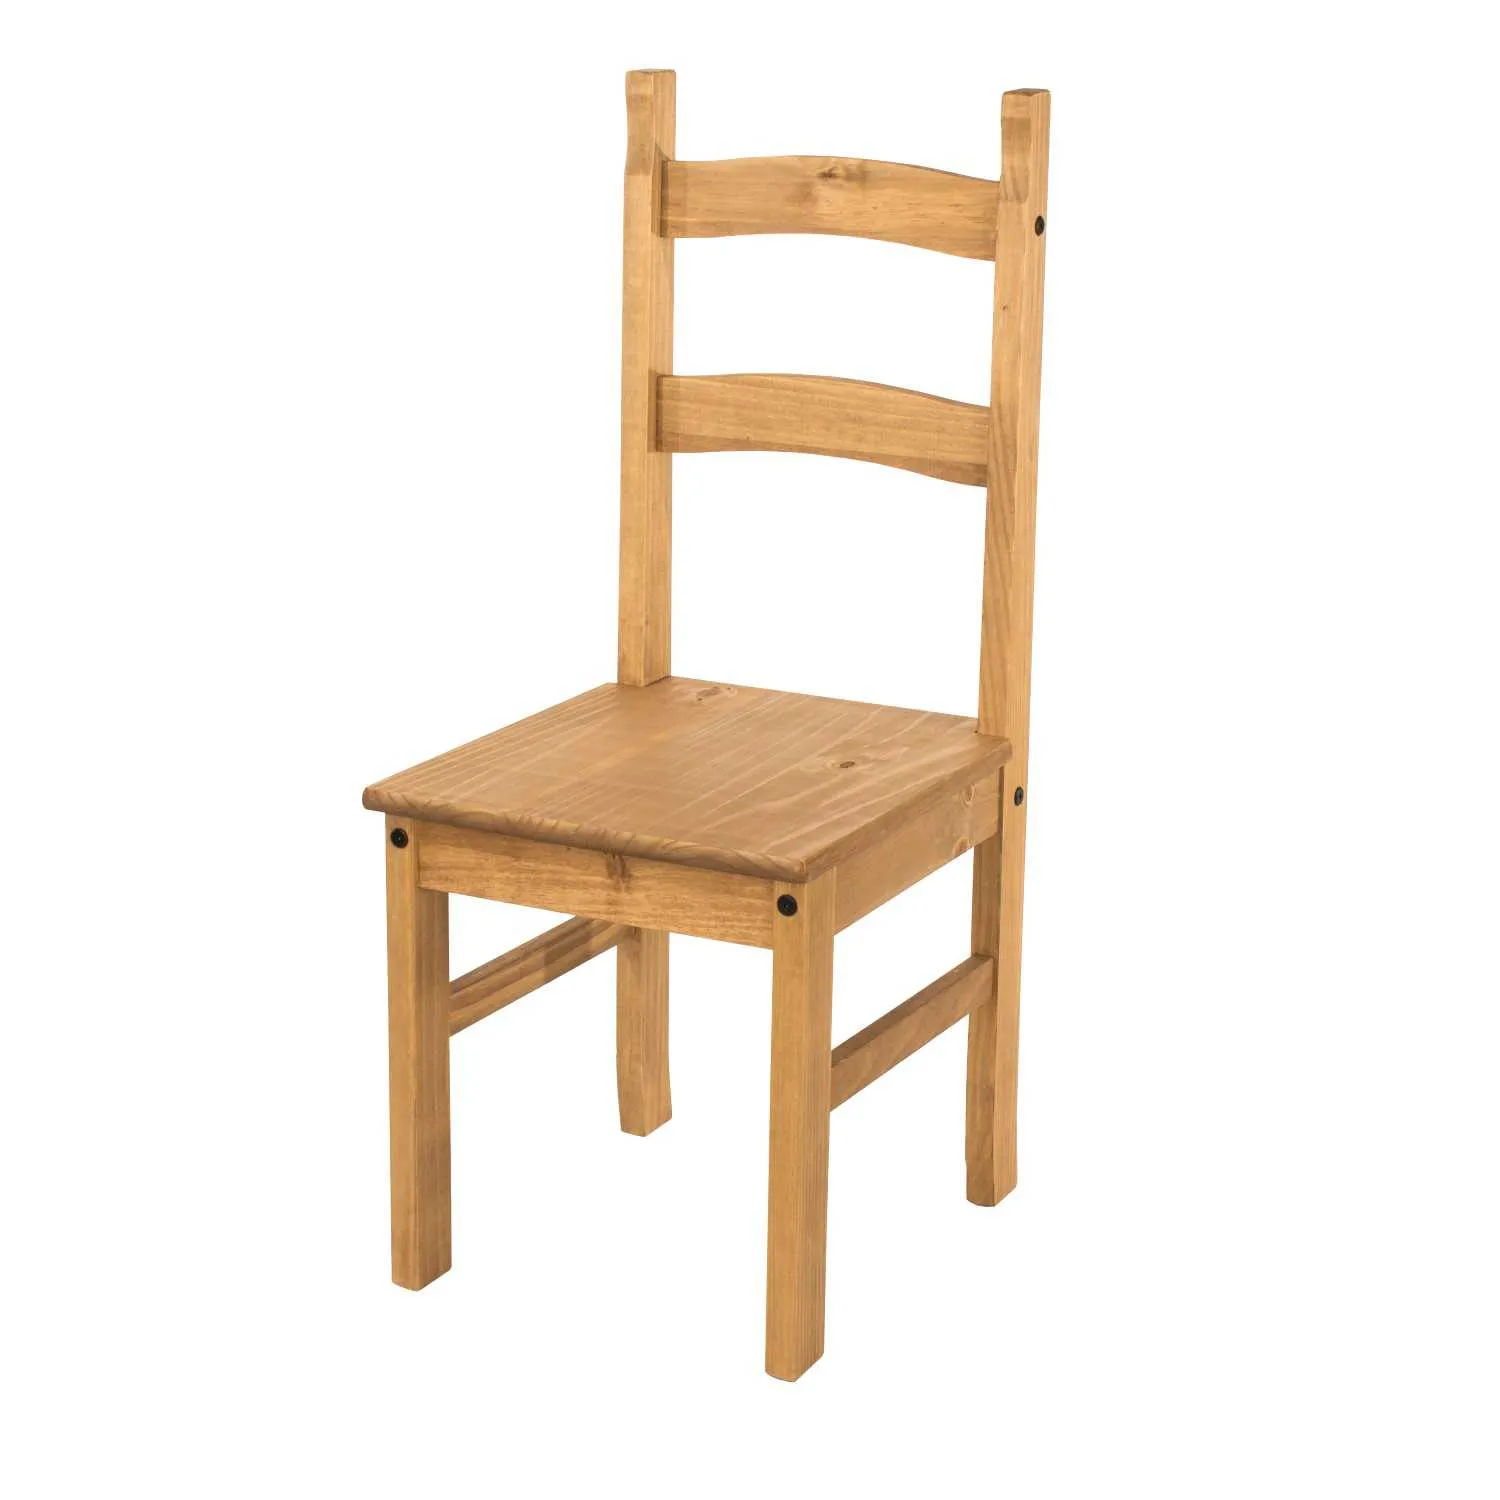 Corona Solid Pine Chairs With Oak stained finish (pair)